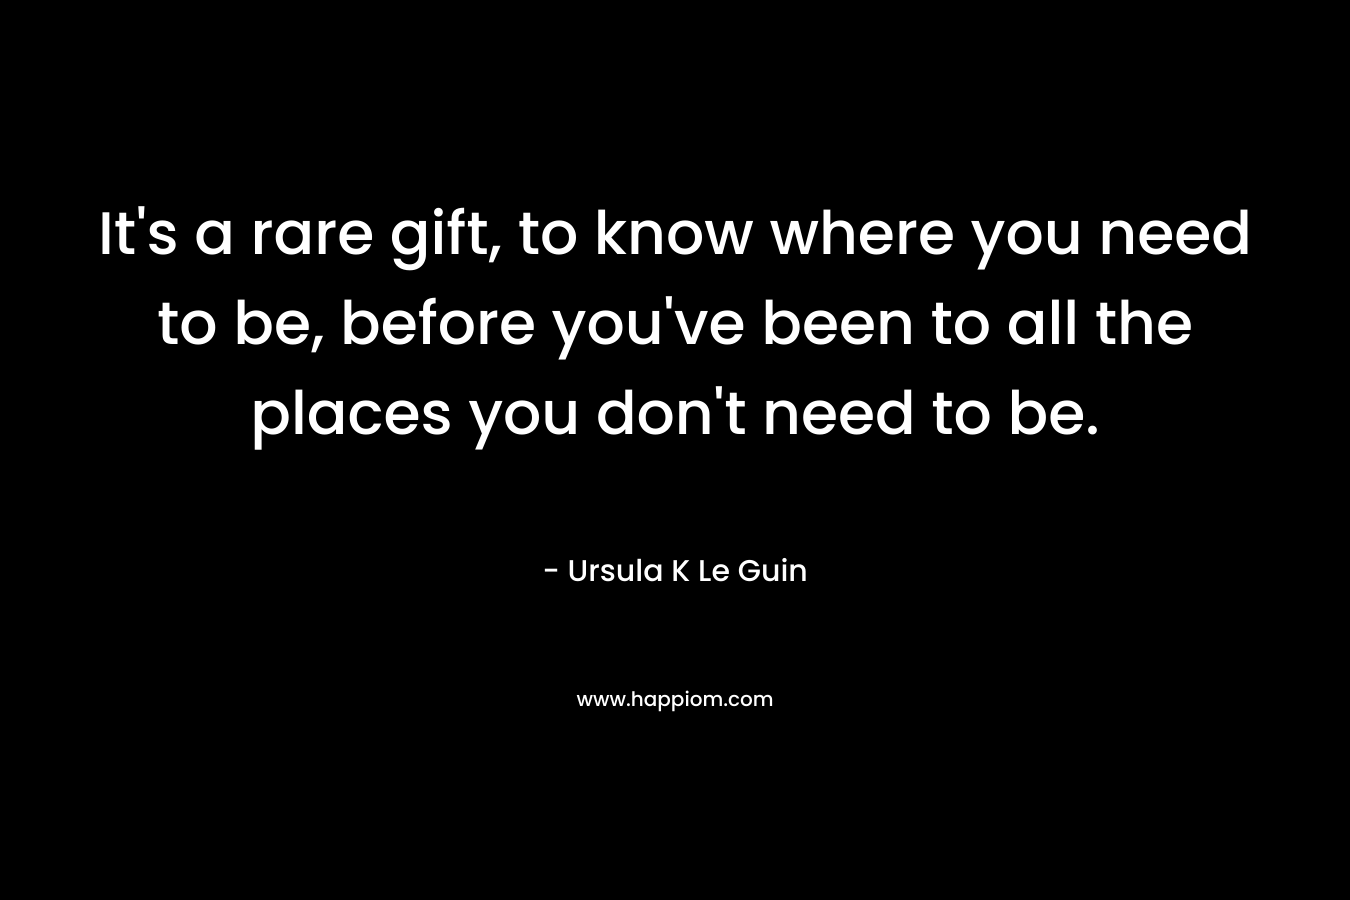 It's a rare gift, to know where you need to be, before you've been to all the places you don't need to be.